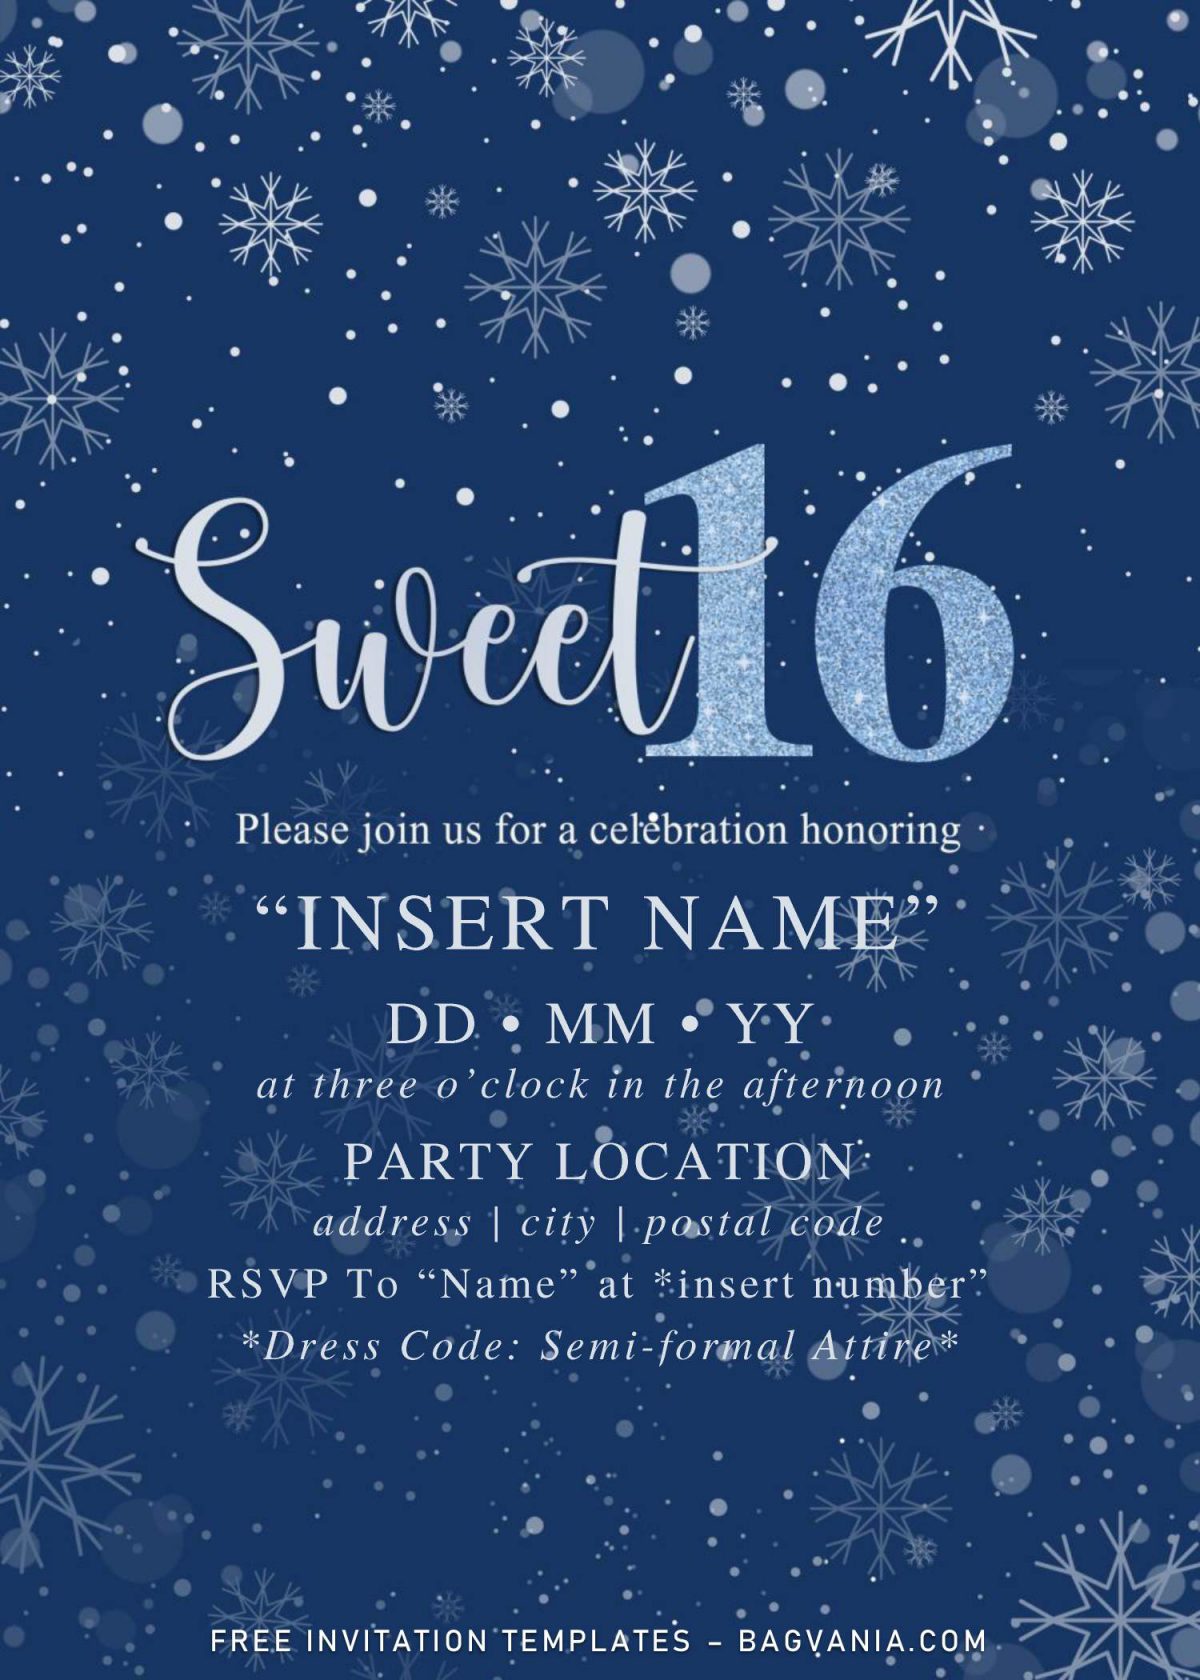 Free Winter Sweet Sixteen Birthday Invitation Templates For Word and has blue glitter text